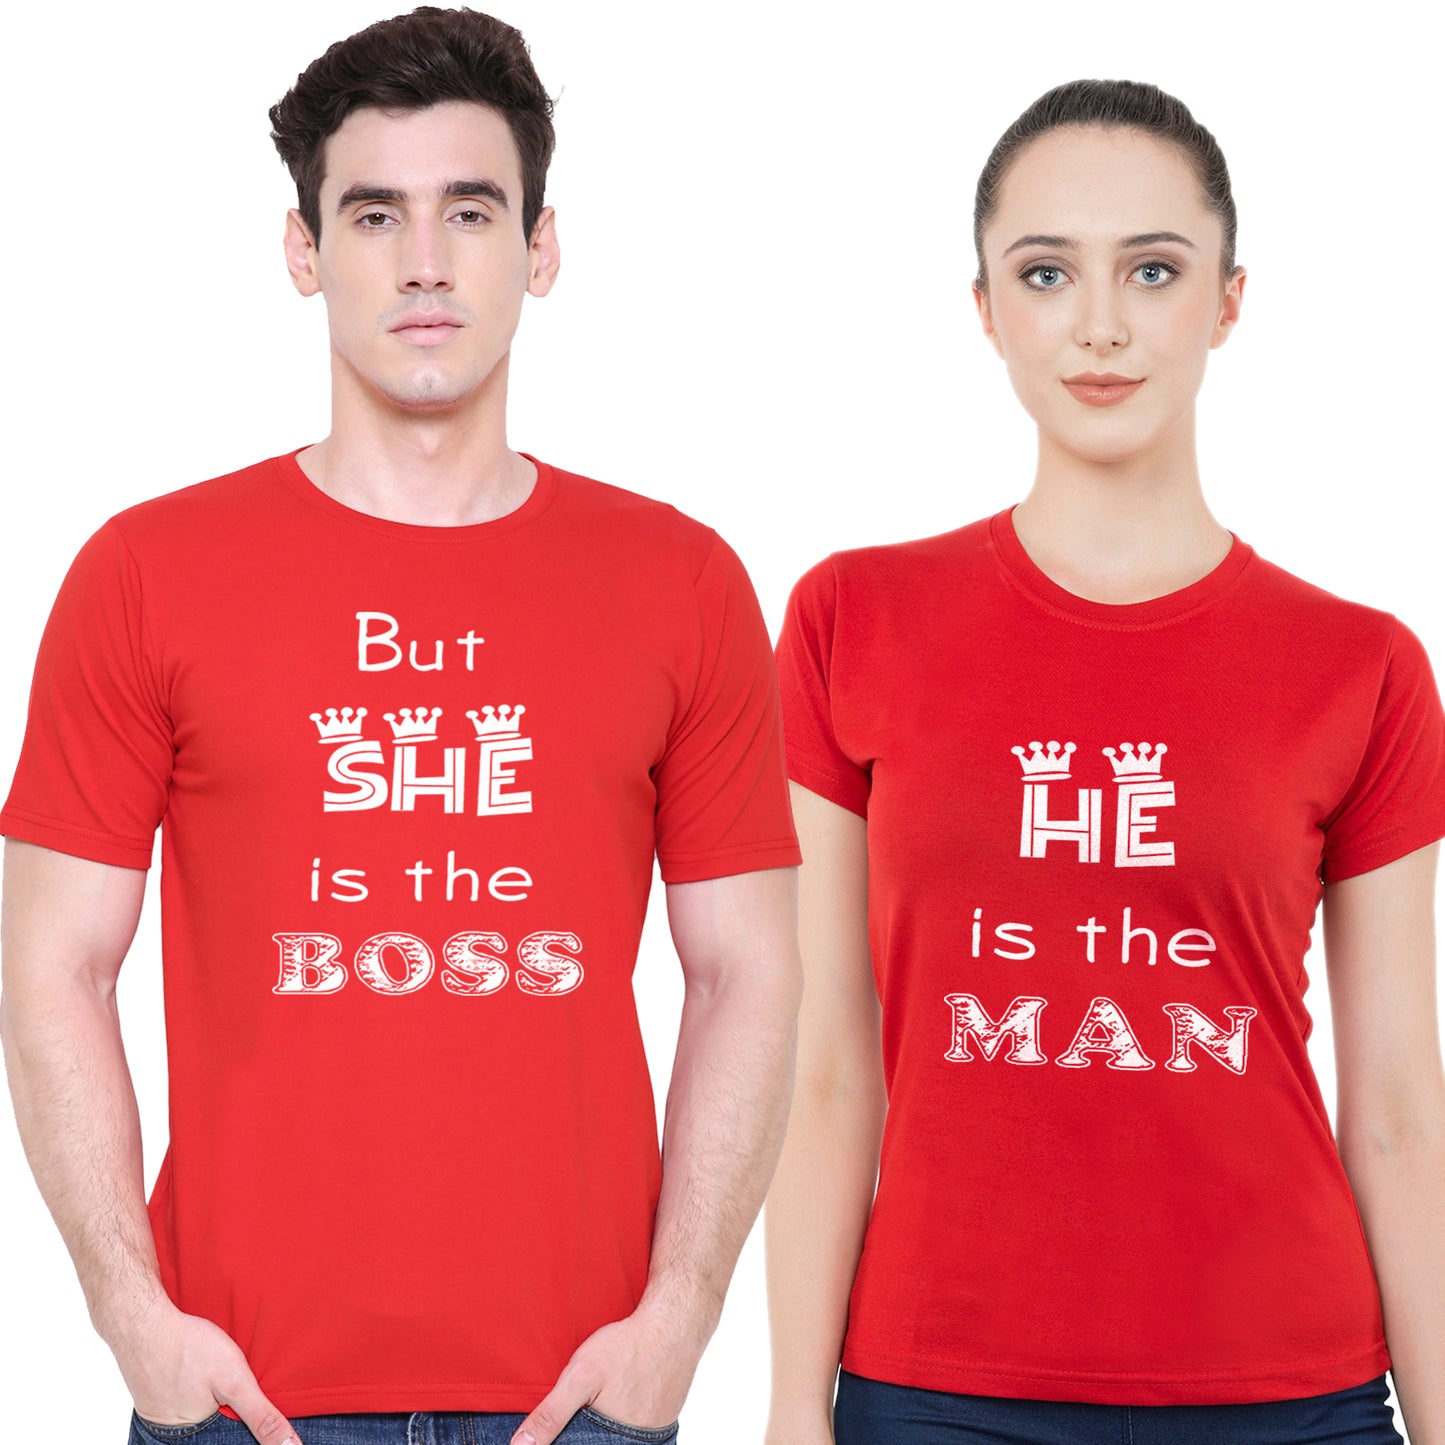 She is the Bossmatching Couple T shirts- Red